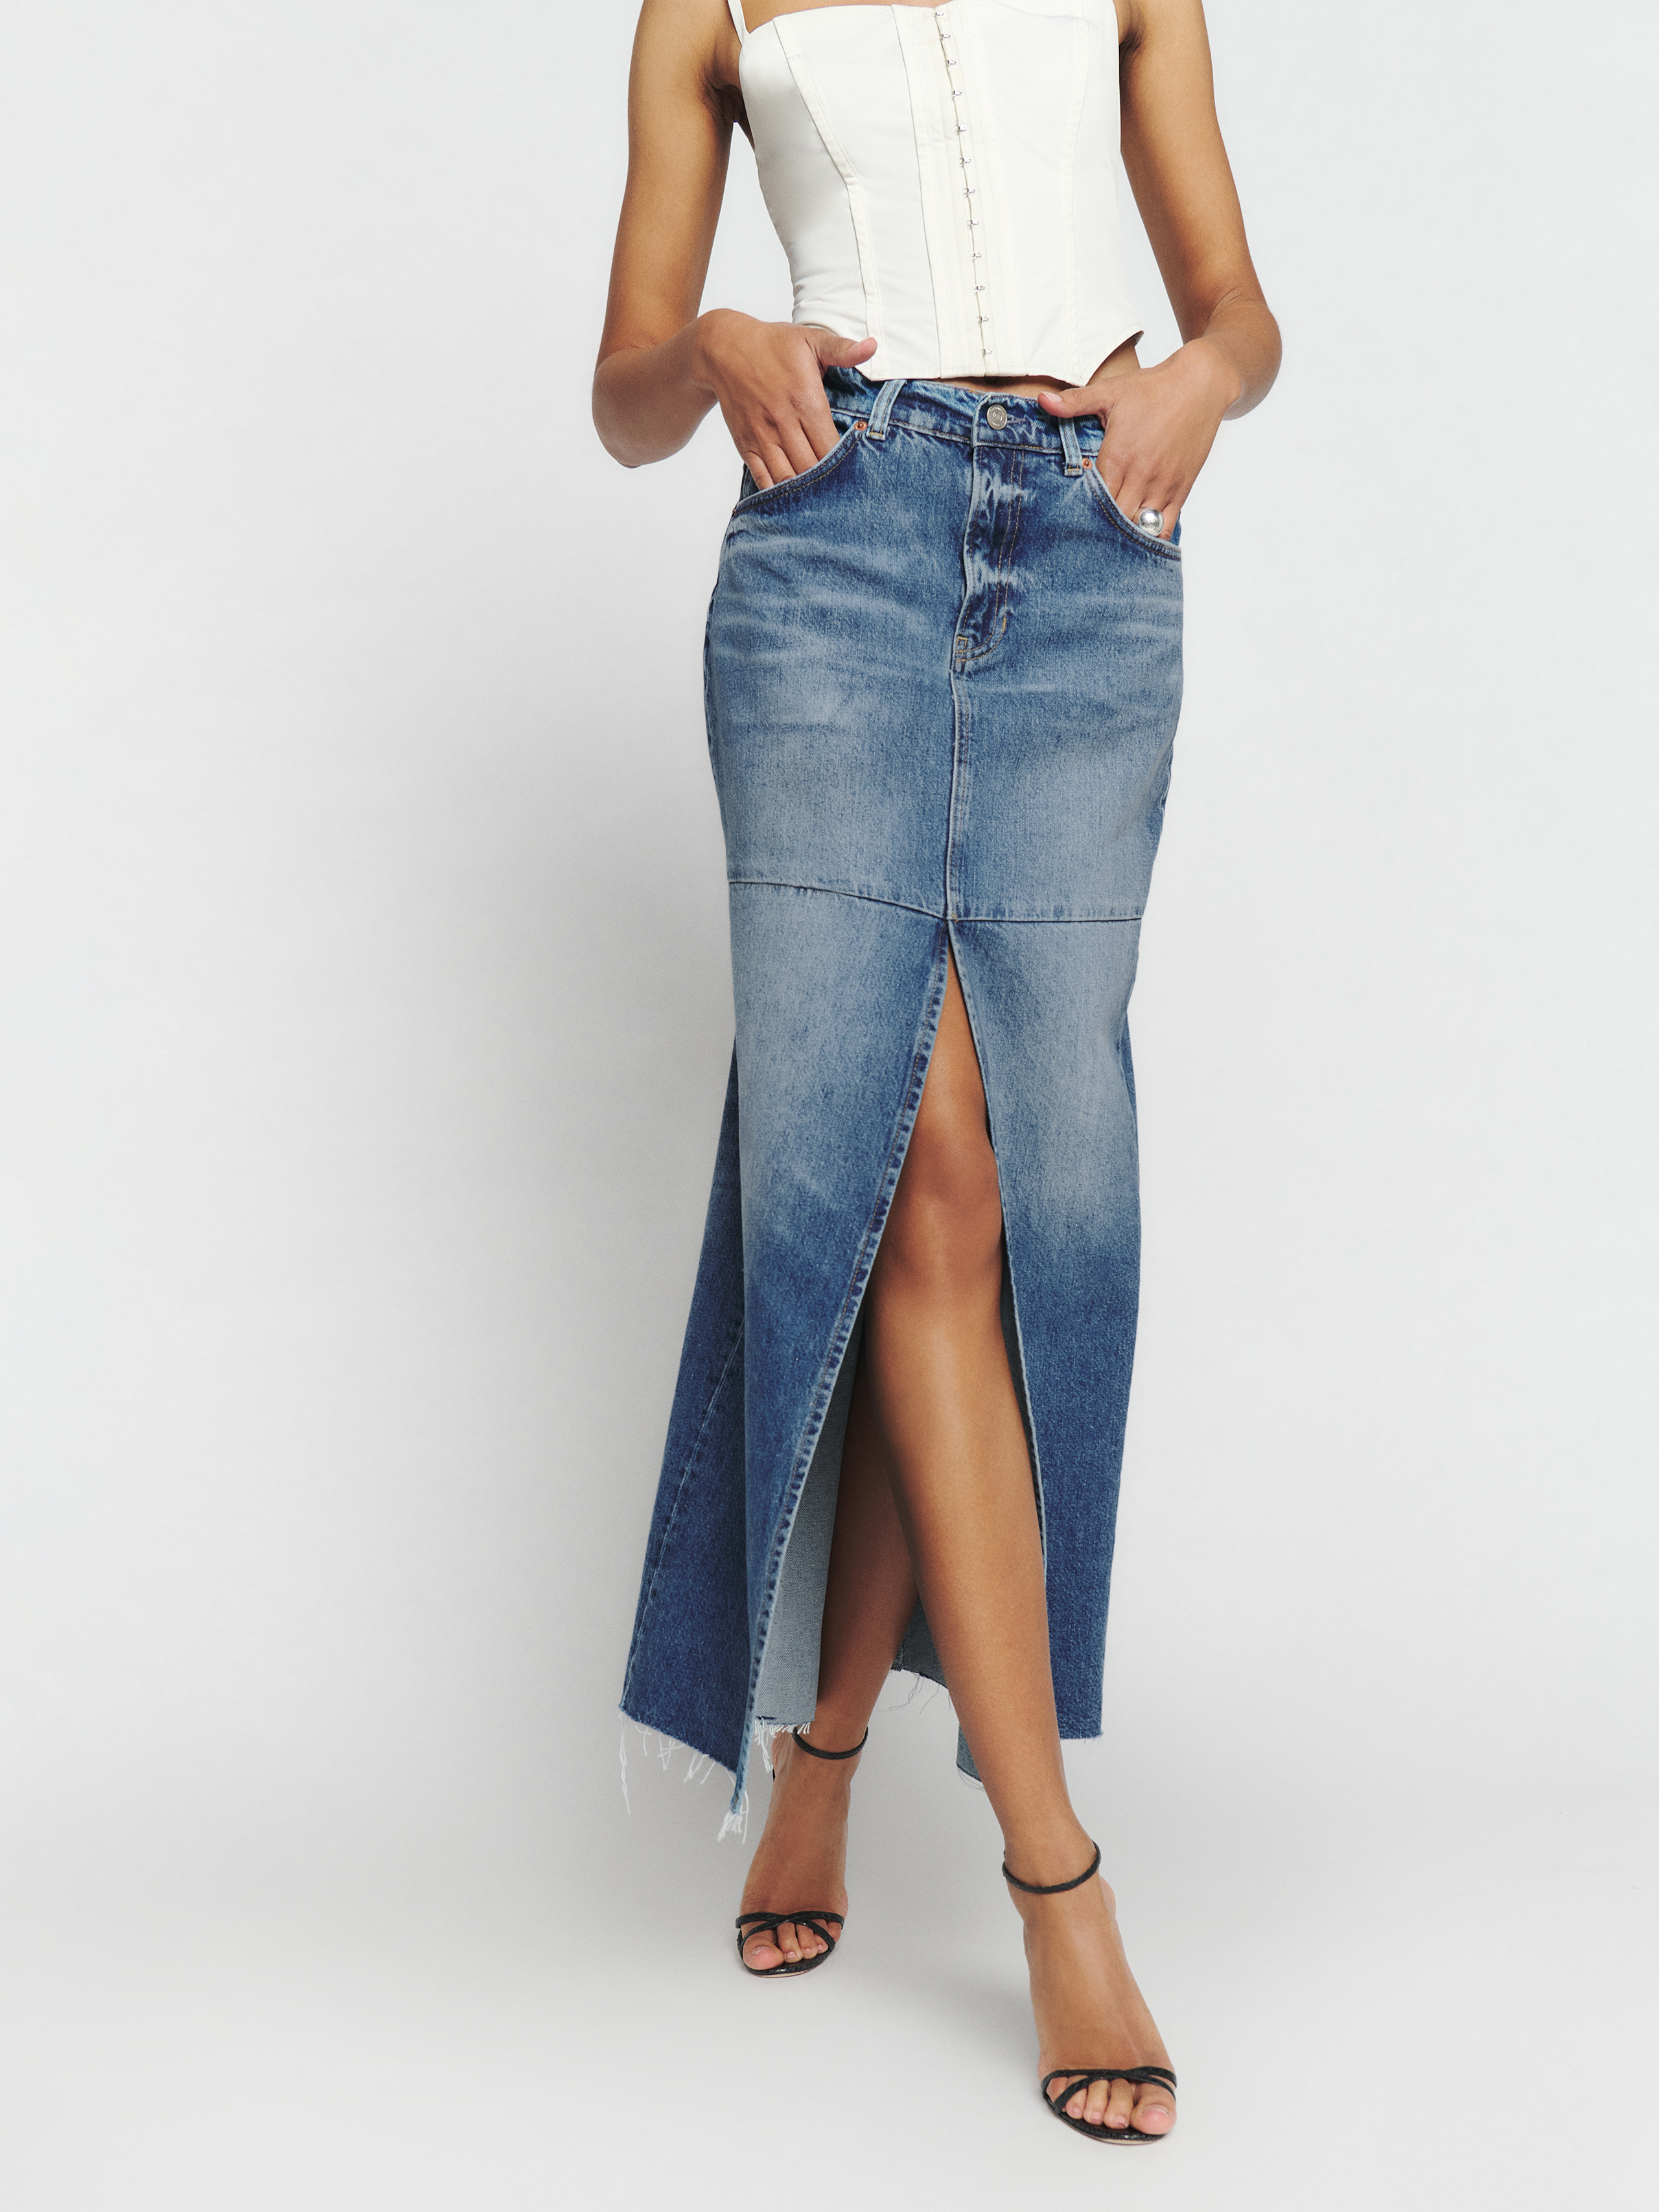 Women's Jeans and Denim | Sustainable Jeans | Reformation